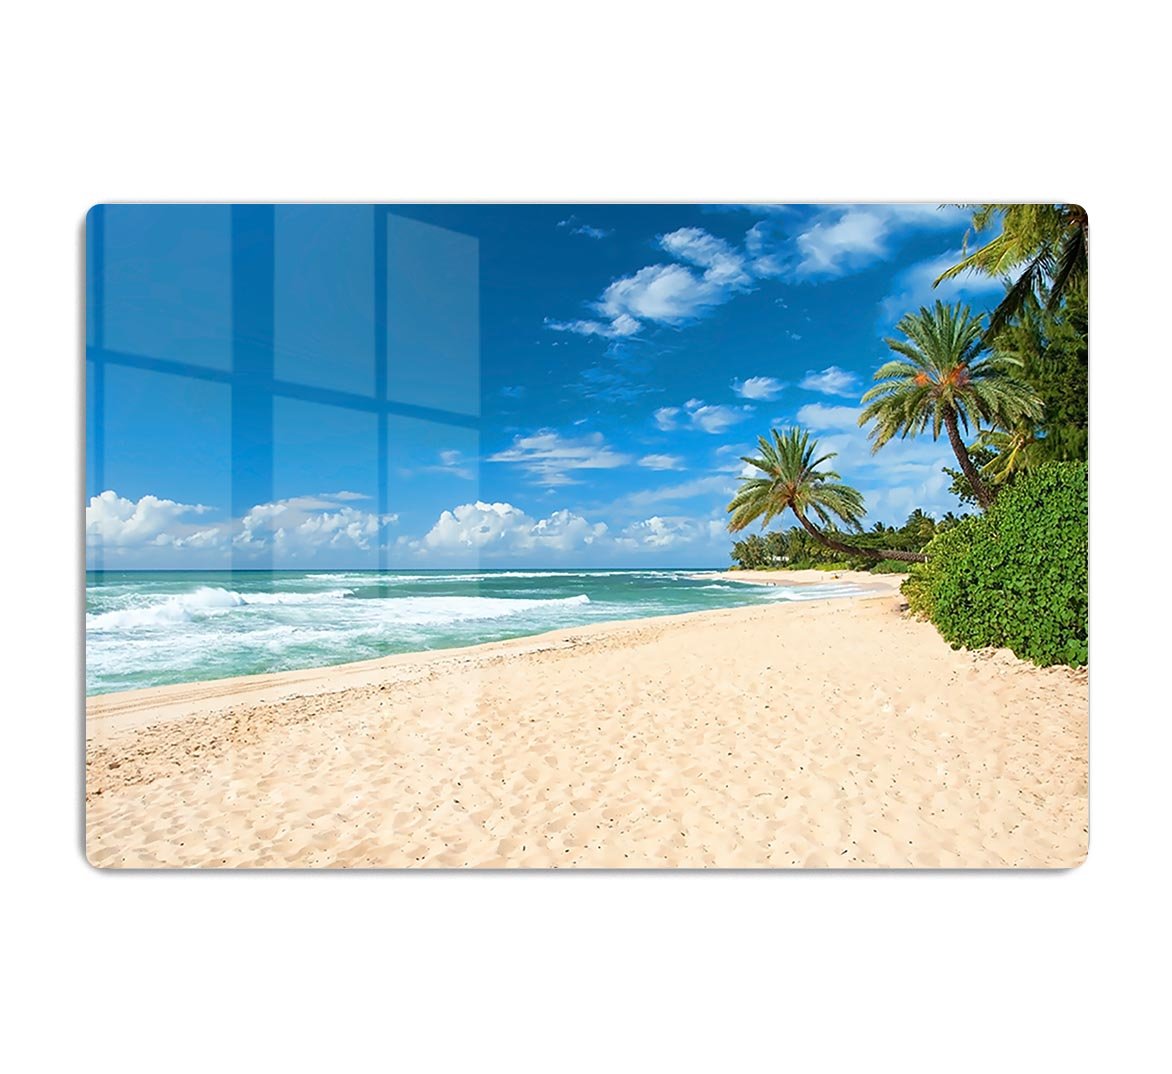 Untouched sandy beach with palms trees HD Metal Print - Canvas Art Rocks - 1